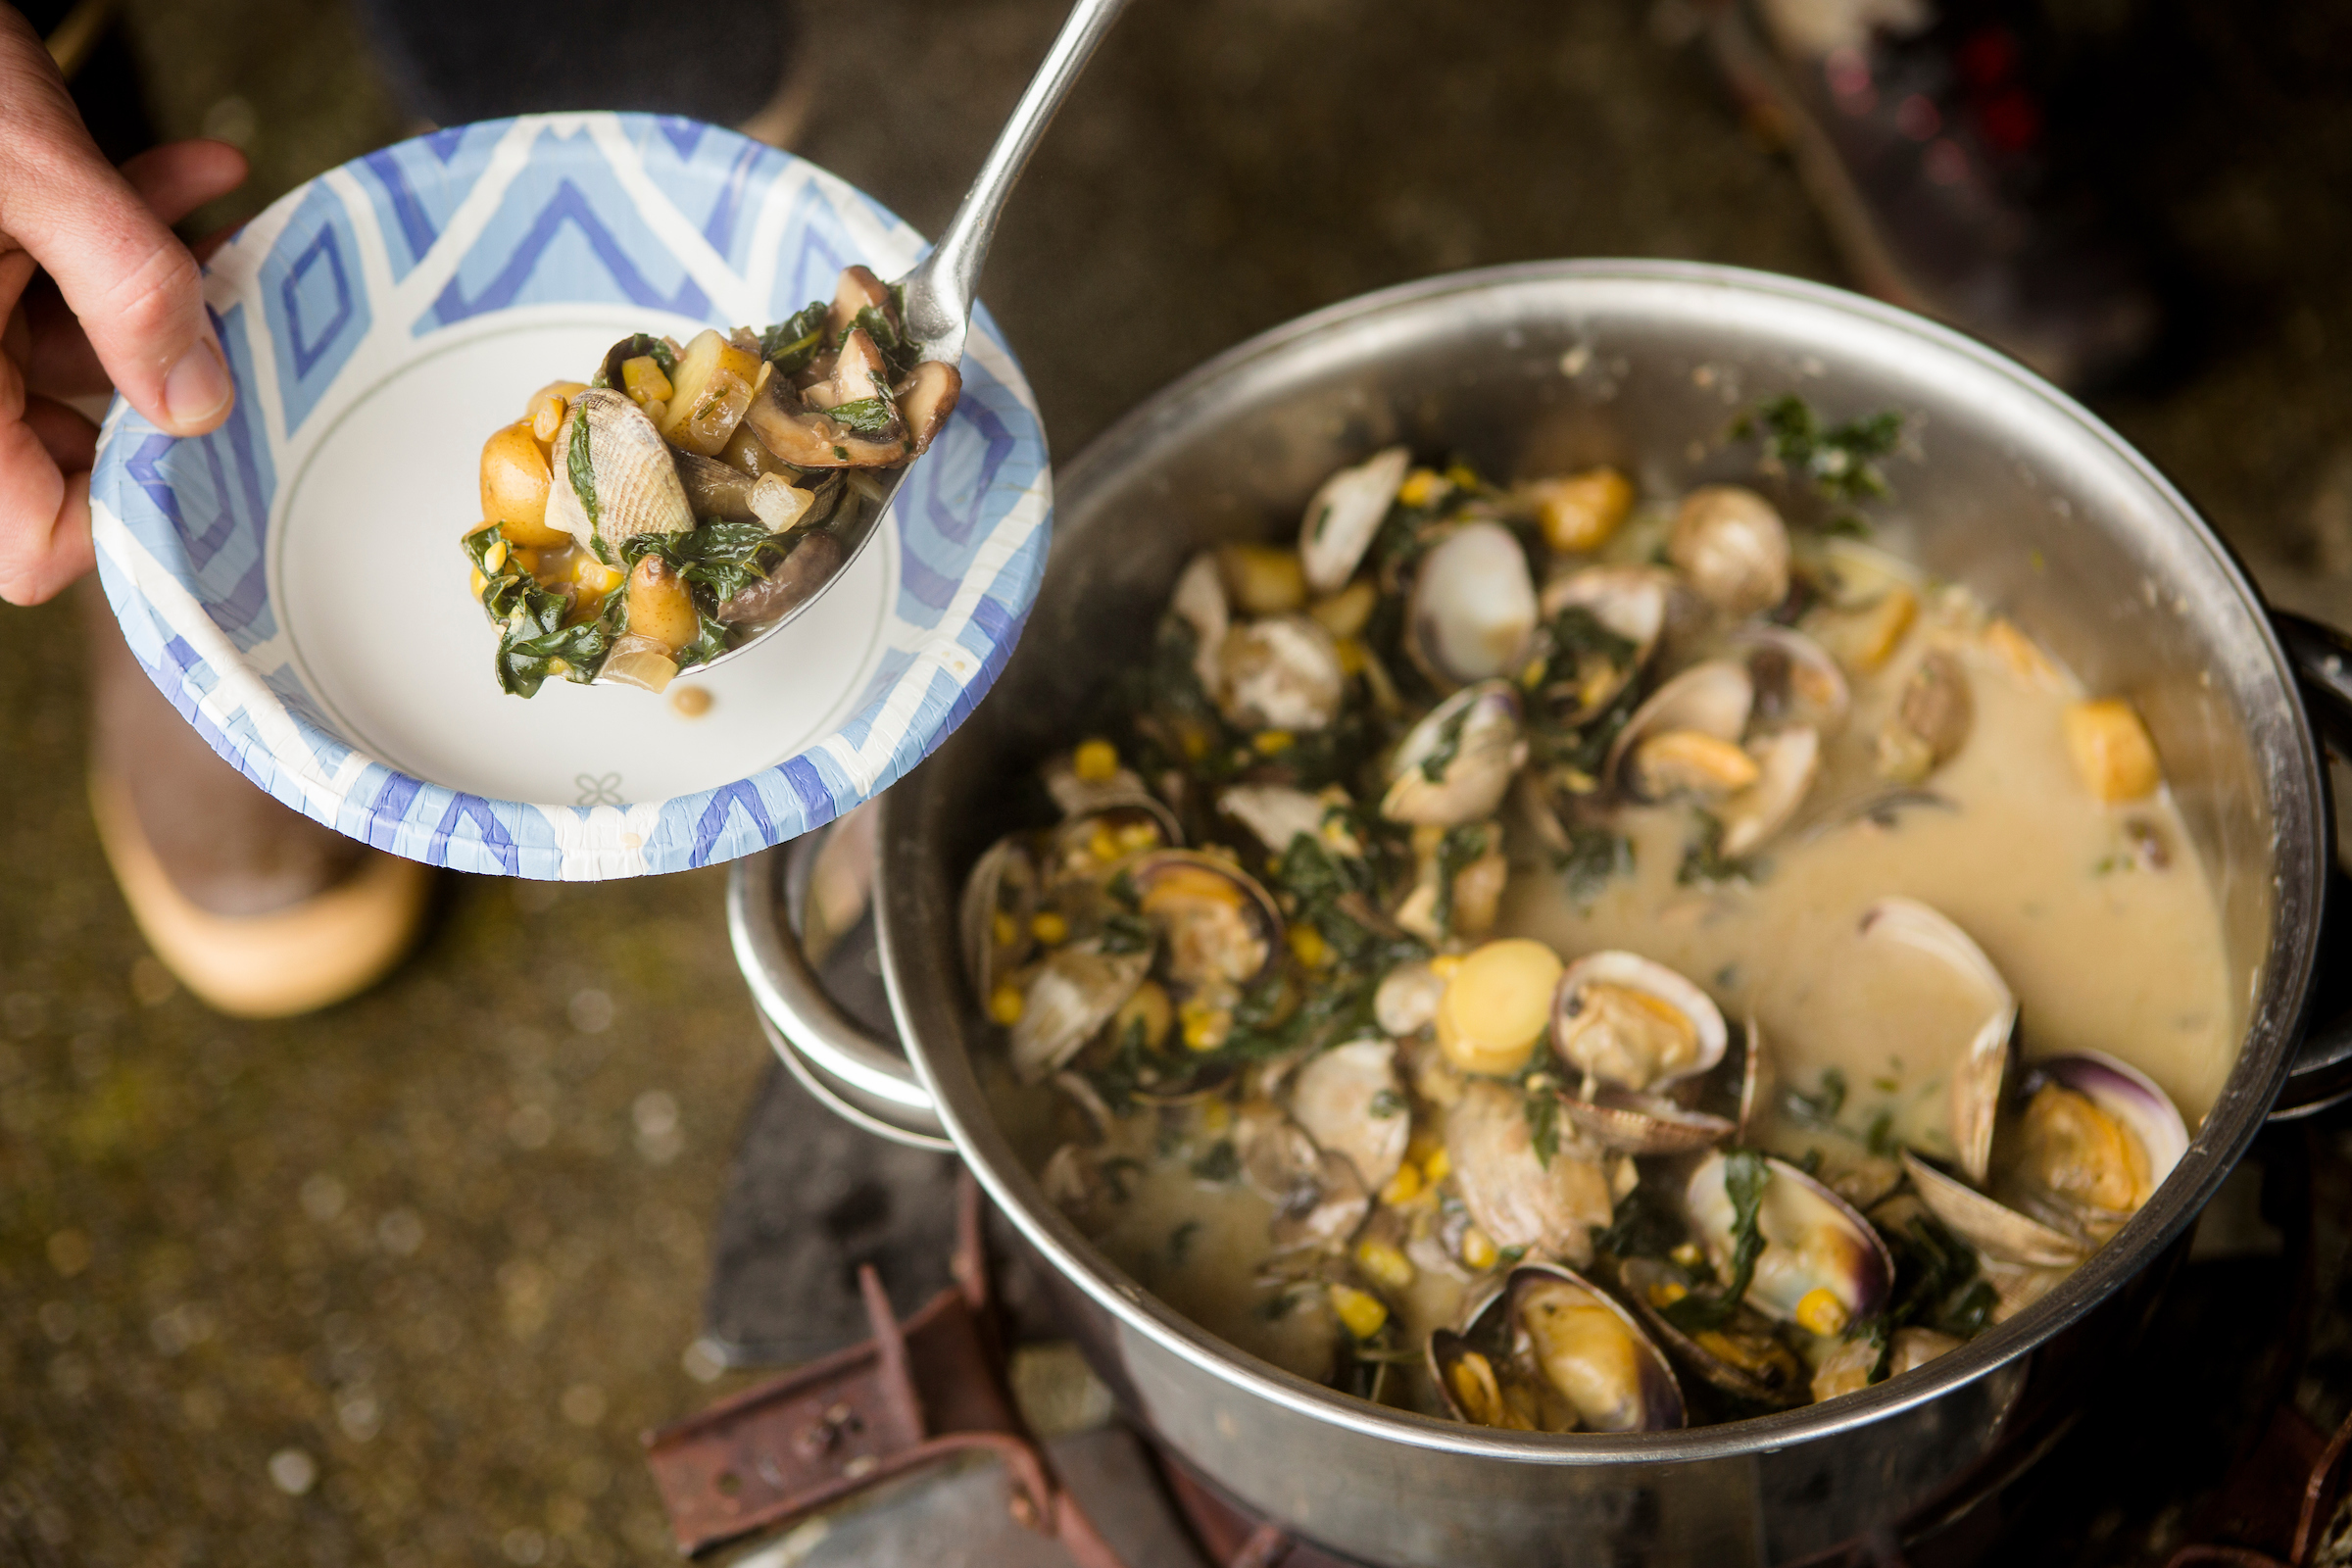 A metal spoon serving steaming clams, greens, and broth into a bowl from a large metal pot